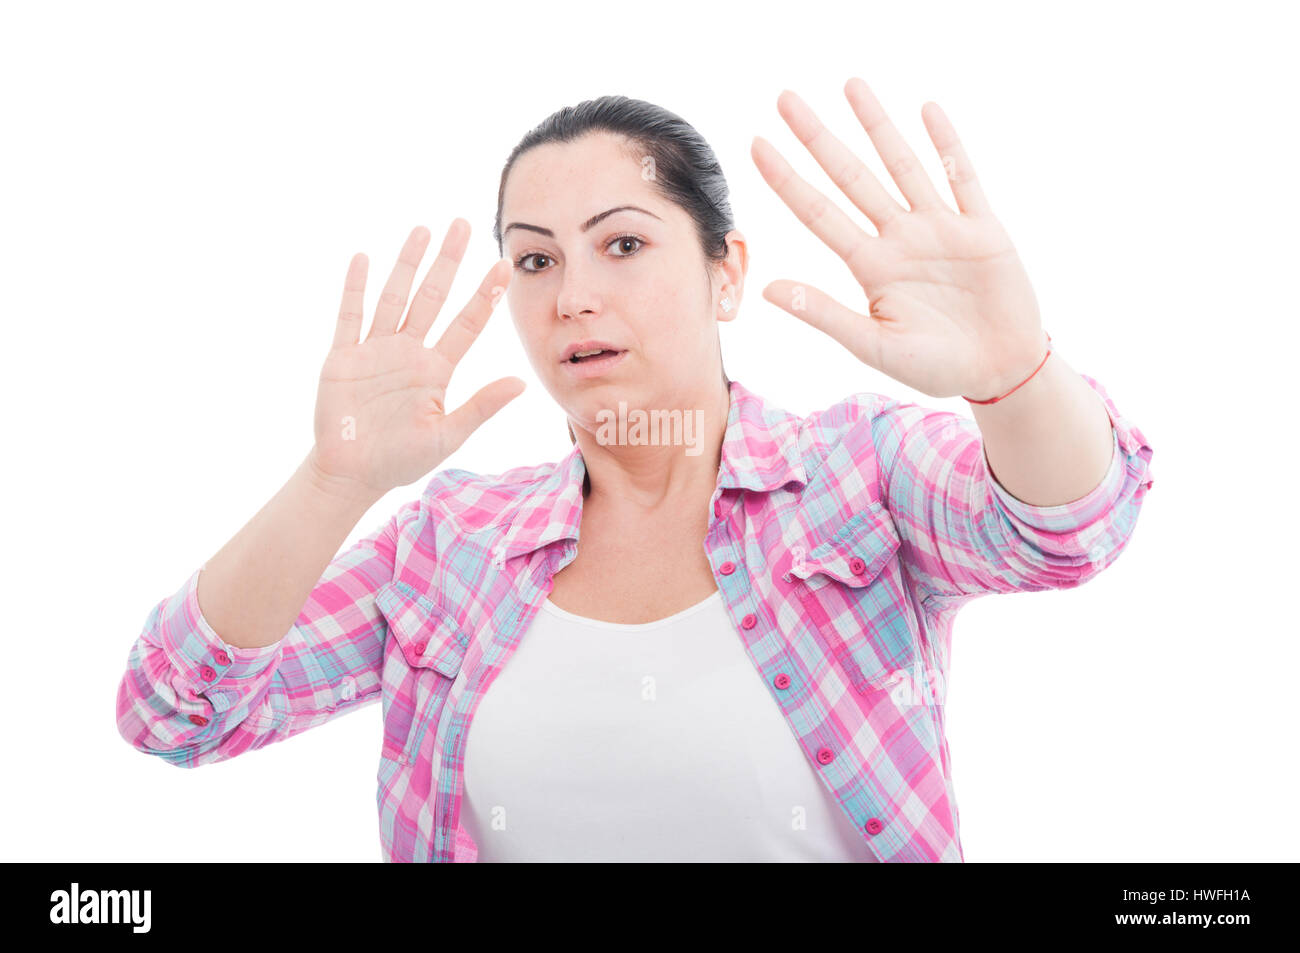 scared-woman-raising-hands-up-in-defense-as-danger-concept-isolated-HWFH1A.jpg